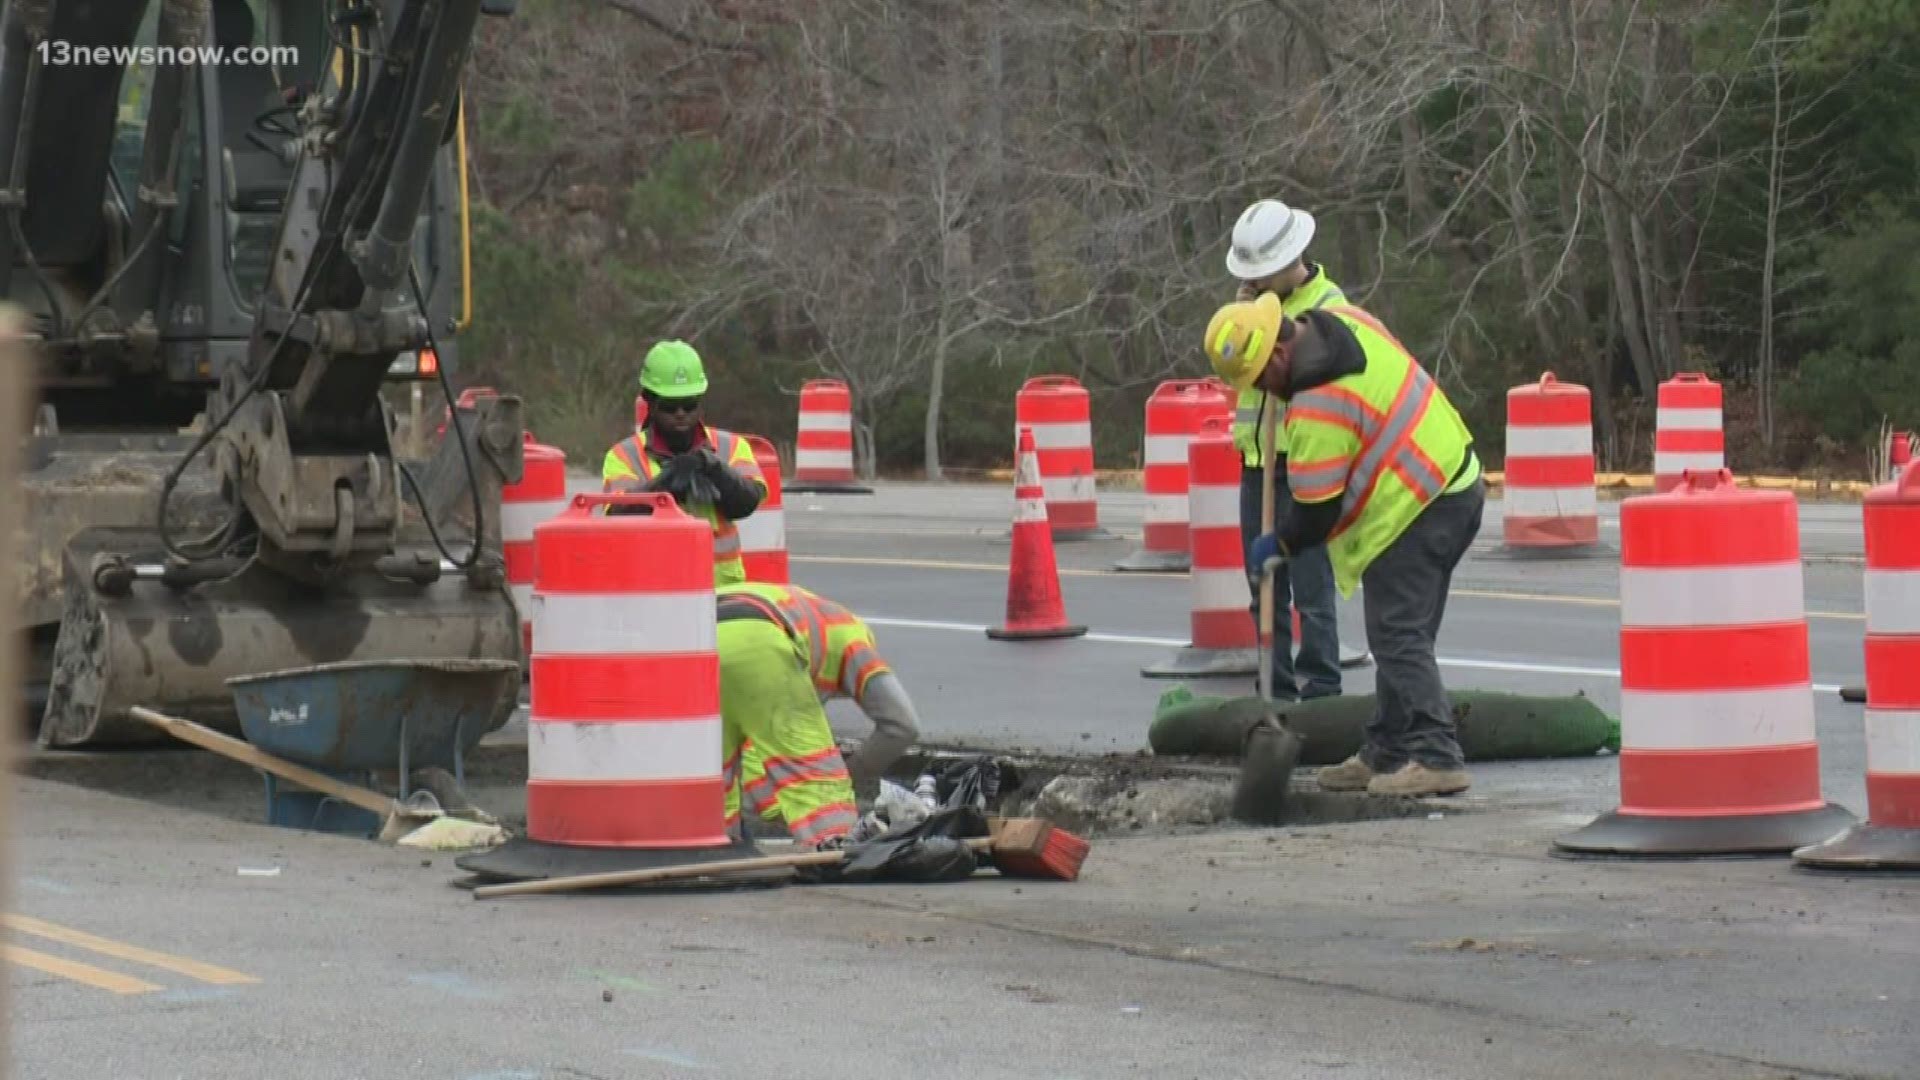 13News Now Ali Weatherton has more on the road work being done on Laskin Road in Virginia Beach to remove the feeder lanes.